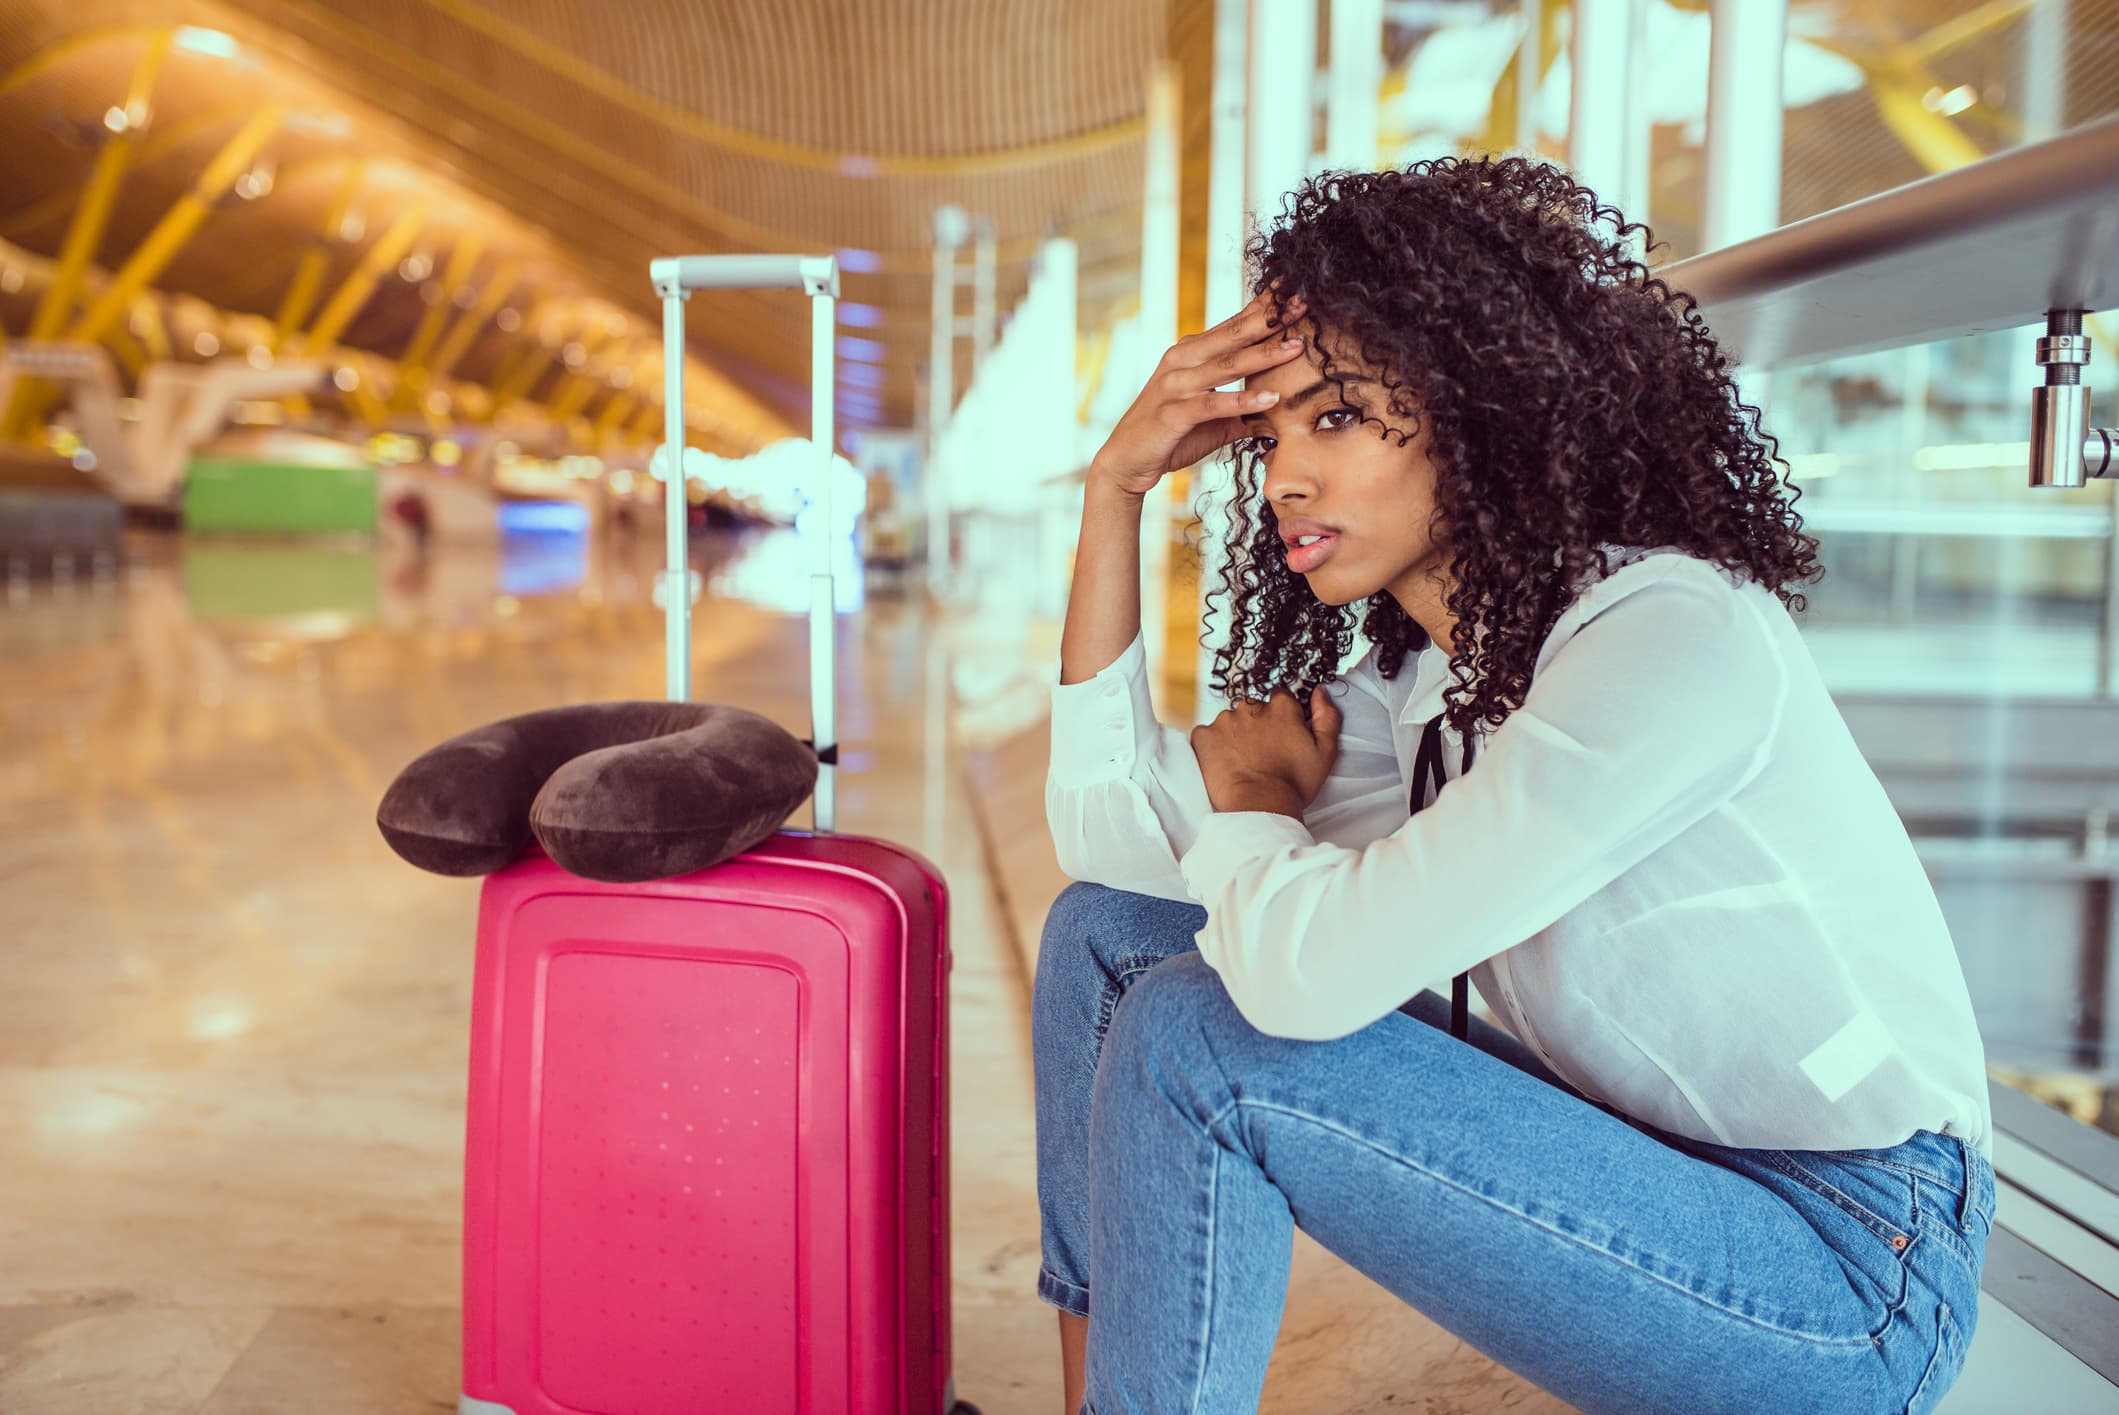 View of a woman sitting at an airport baggage carousel looking frustrated.